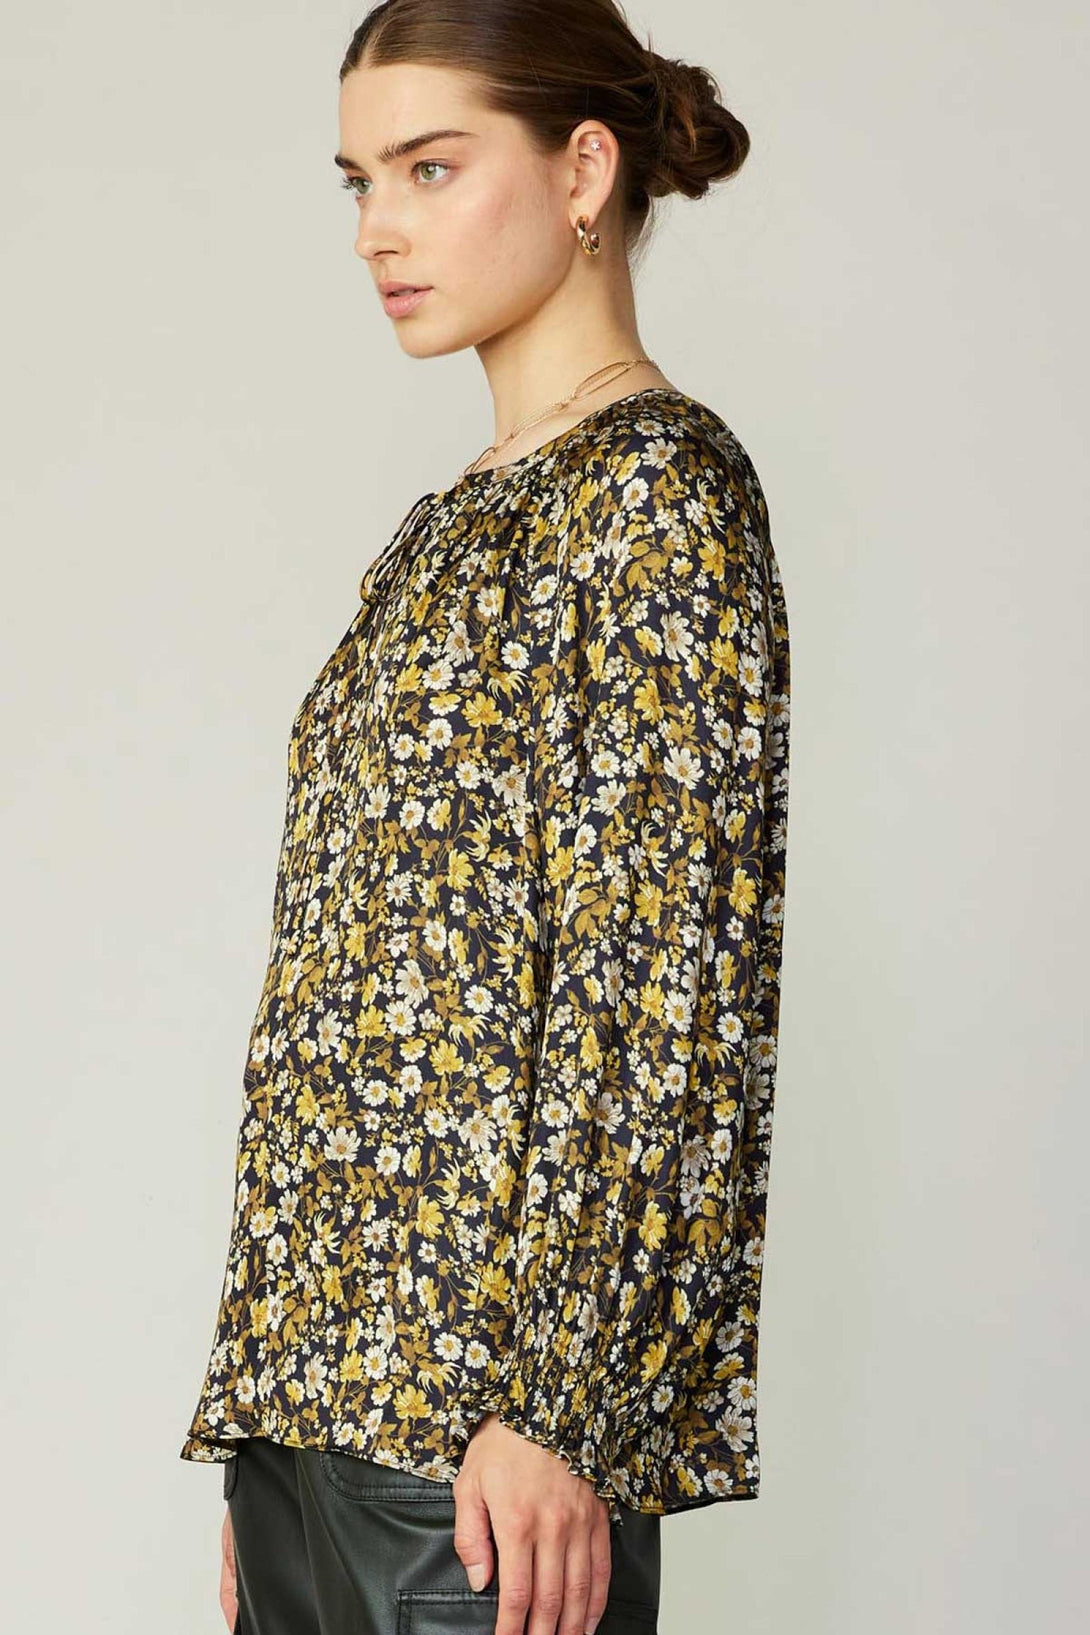 Current Air Long Sleeve Floral Blouse V-Neck Top